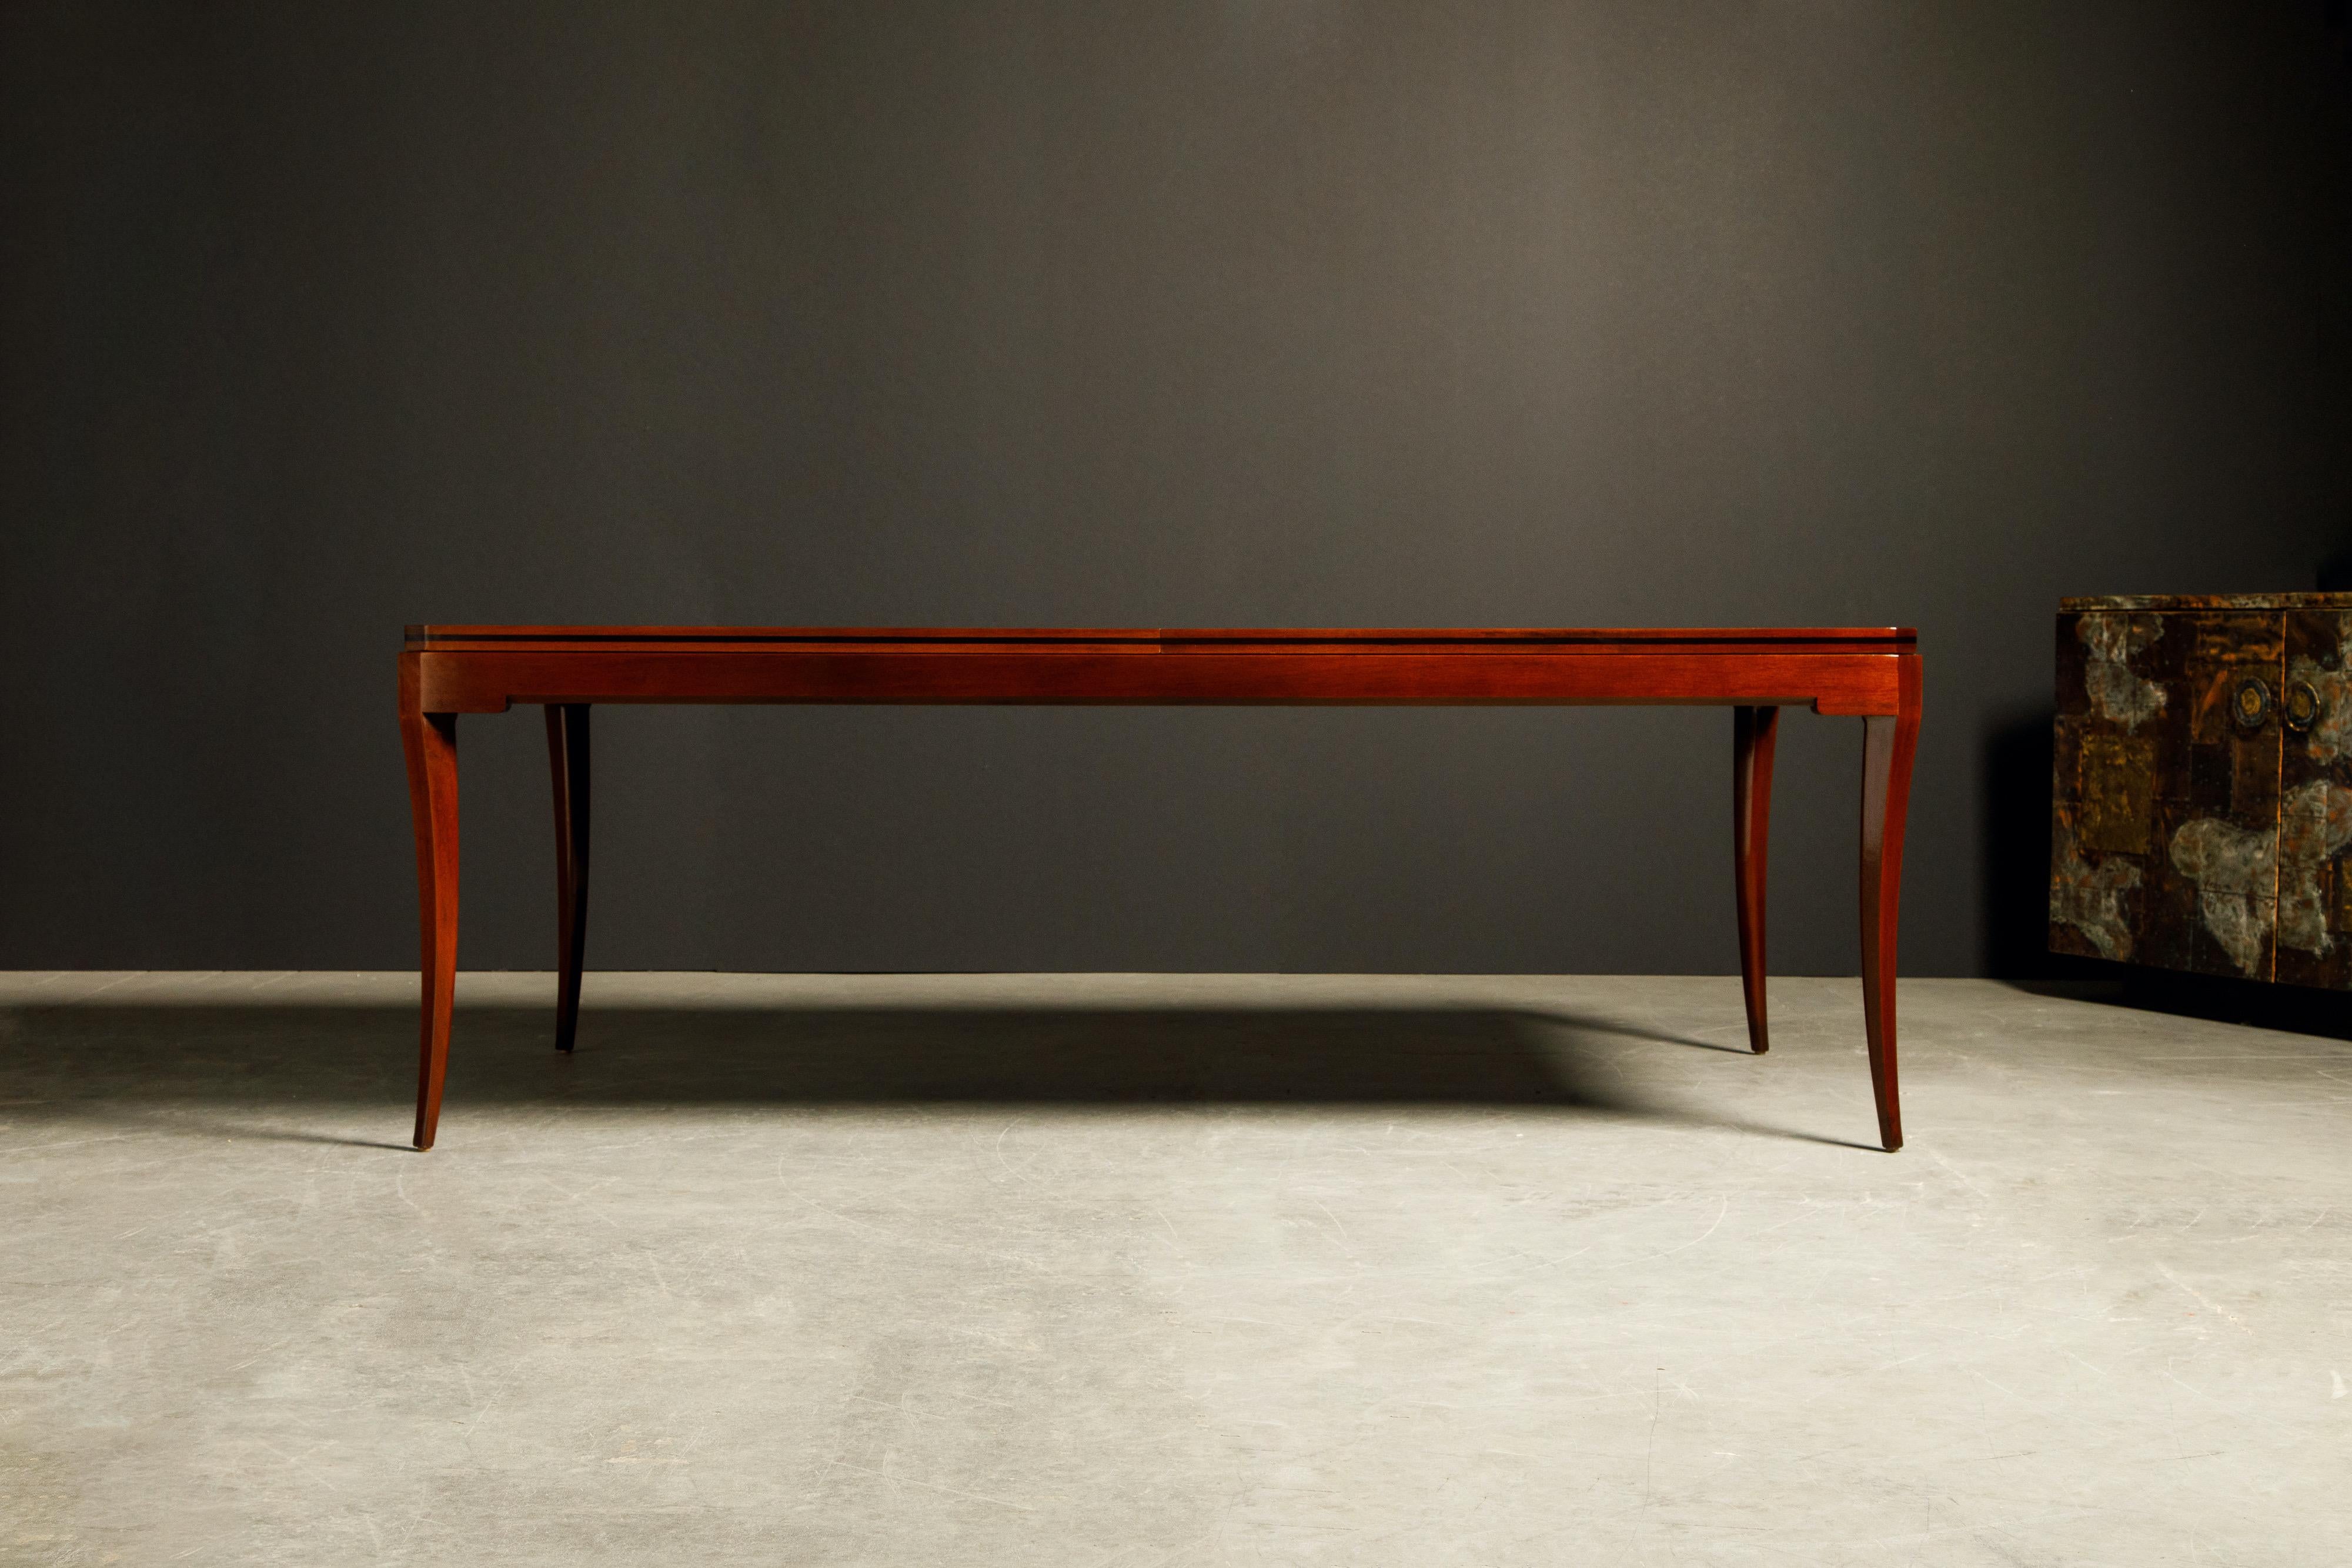 An incredible signed Parzinger Originals mahogany and ebony inlay dining table designed by Tommi Parzinger and crafted in the early 1960s, signed underneath 